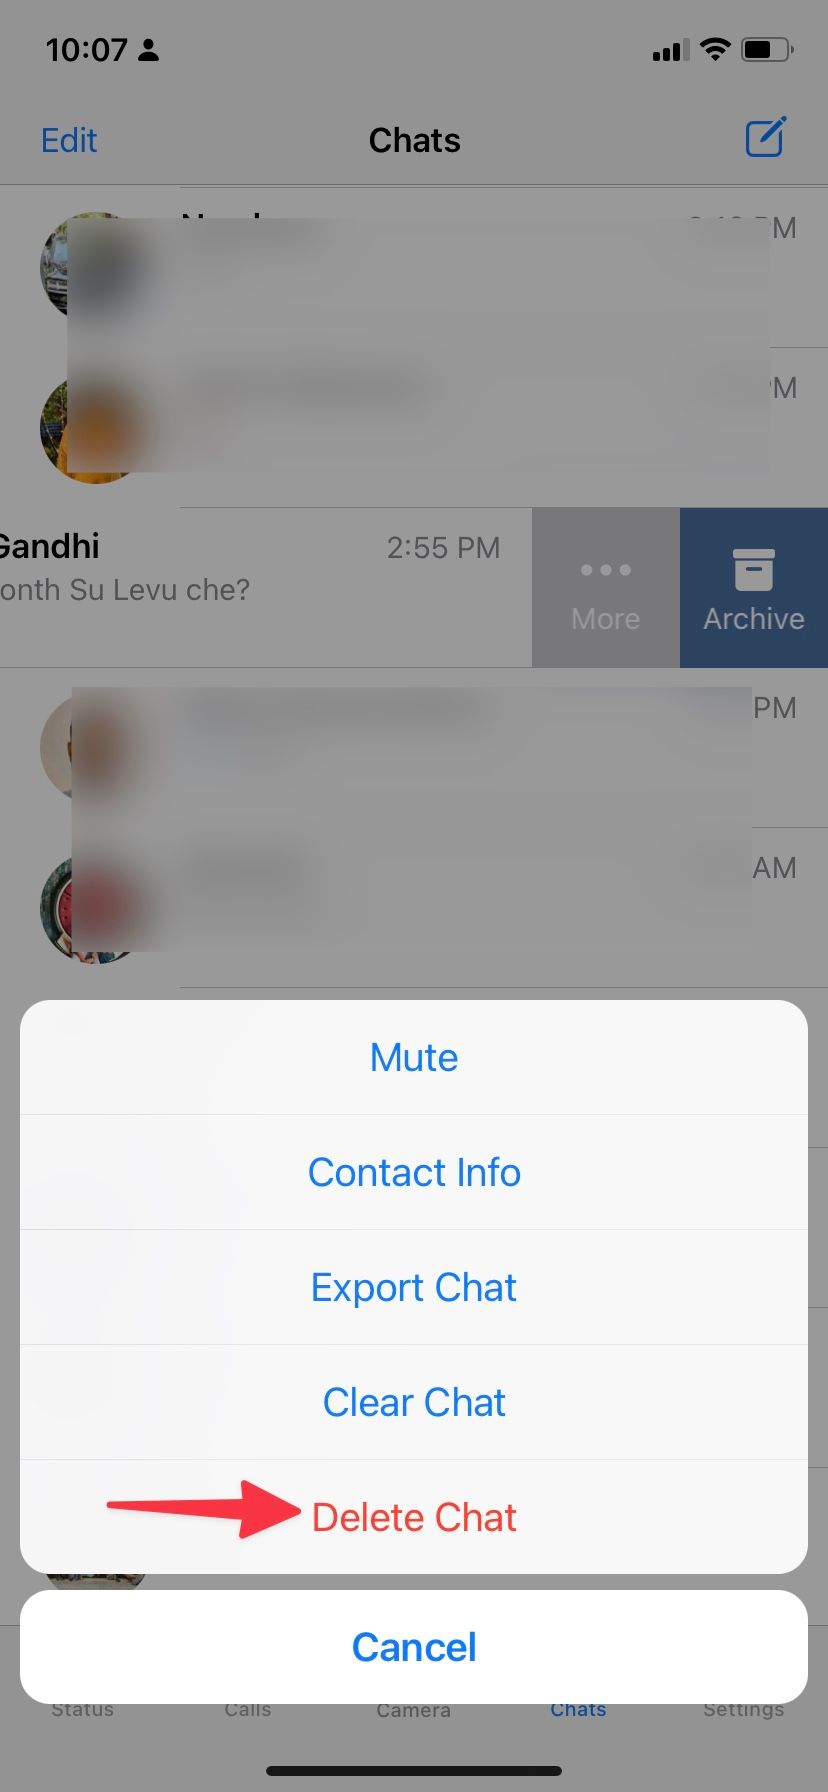 delete chat in WhatsApp for iPhone